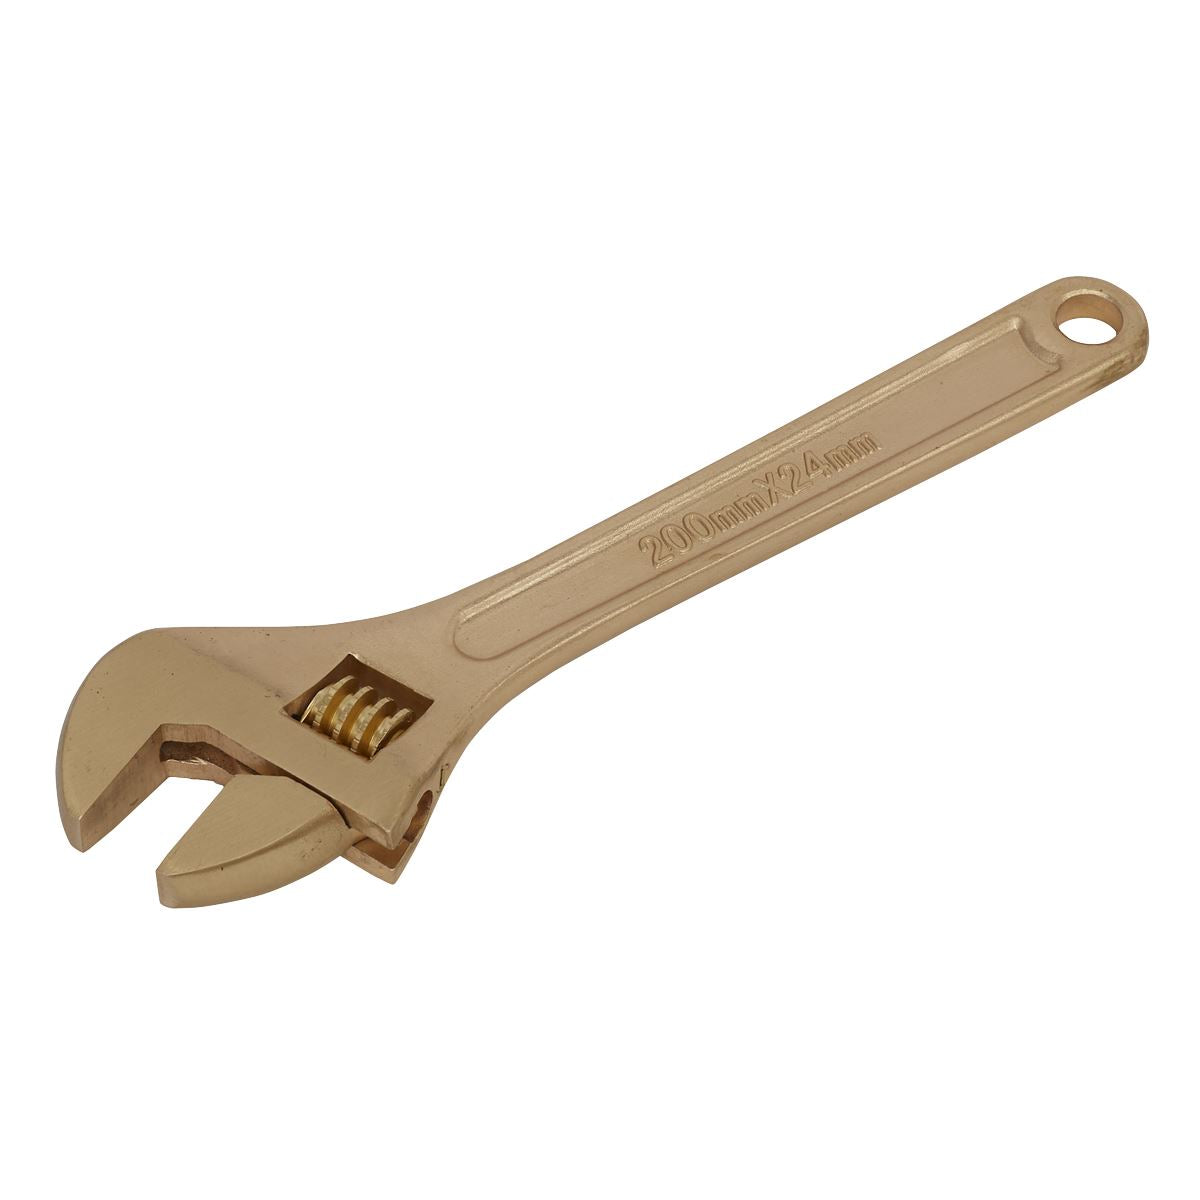 Sealey Premier Adjustable Wrench 200mm - Non-Sparking